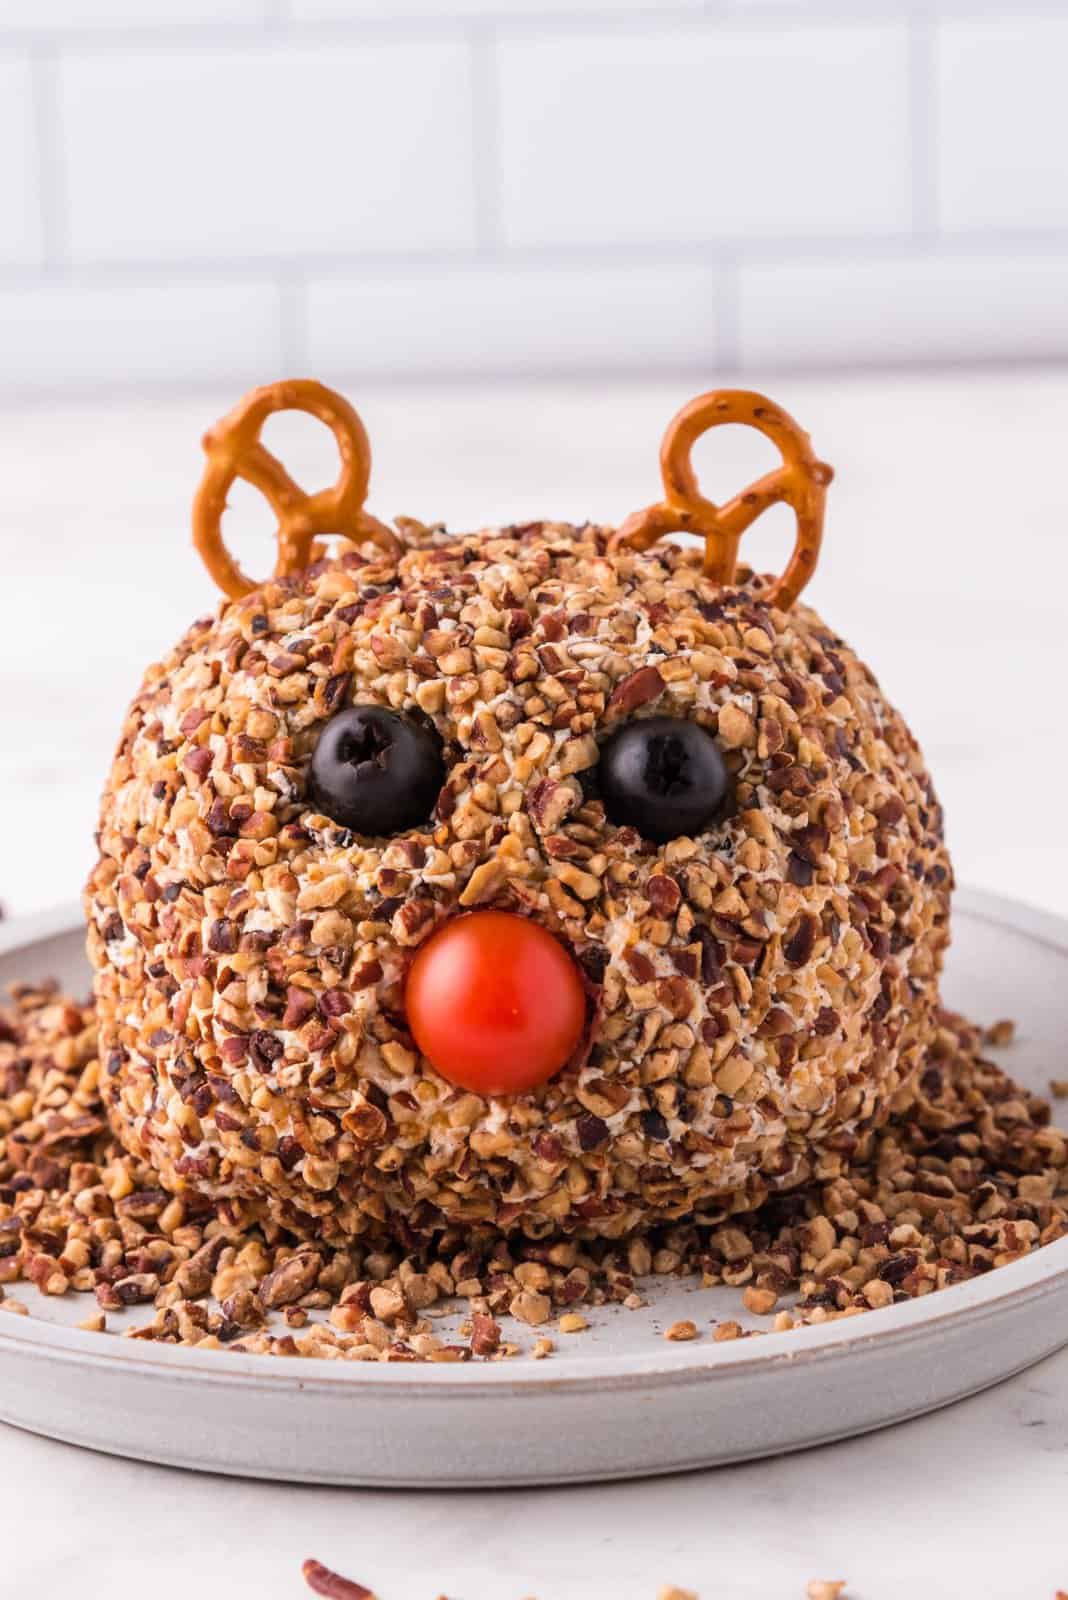 Pretzels, olives and tomato added to cheeseball to make a face.